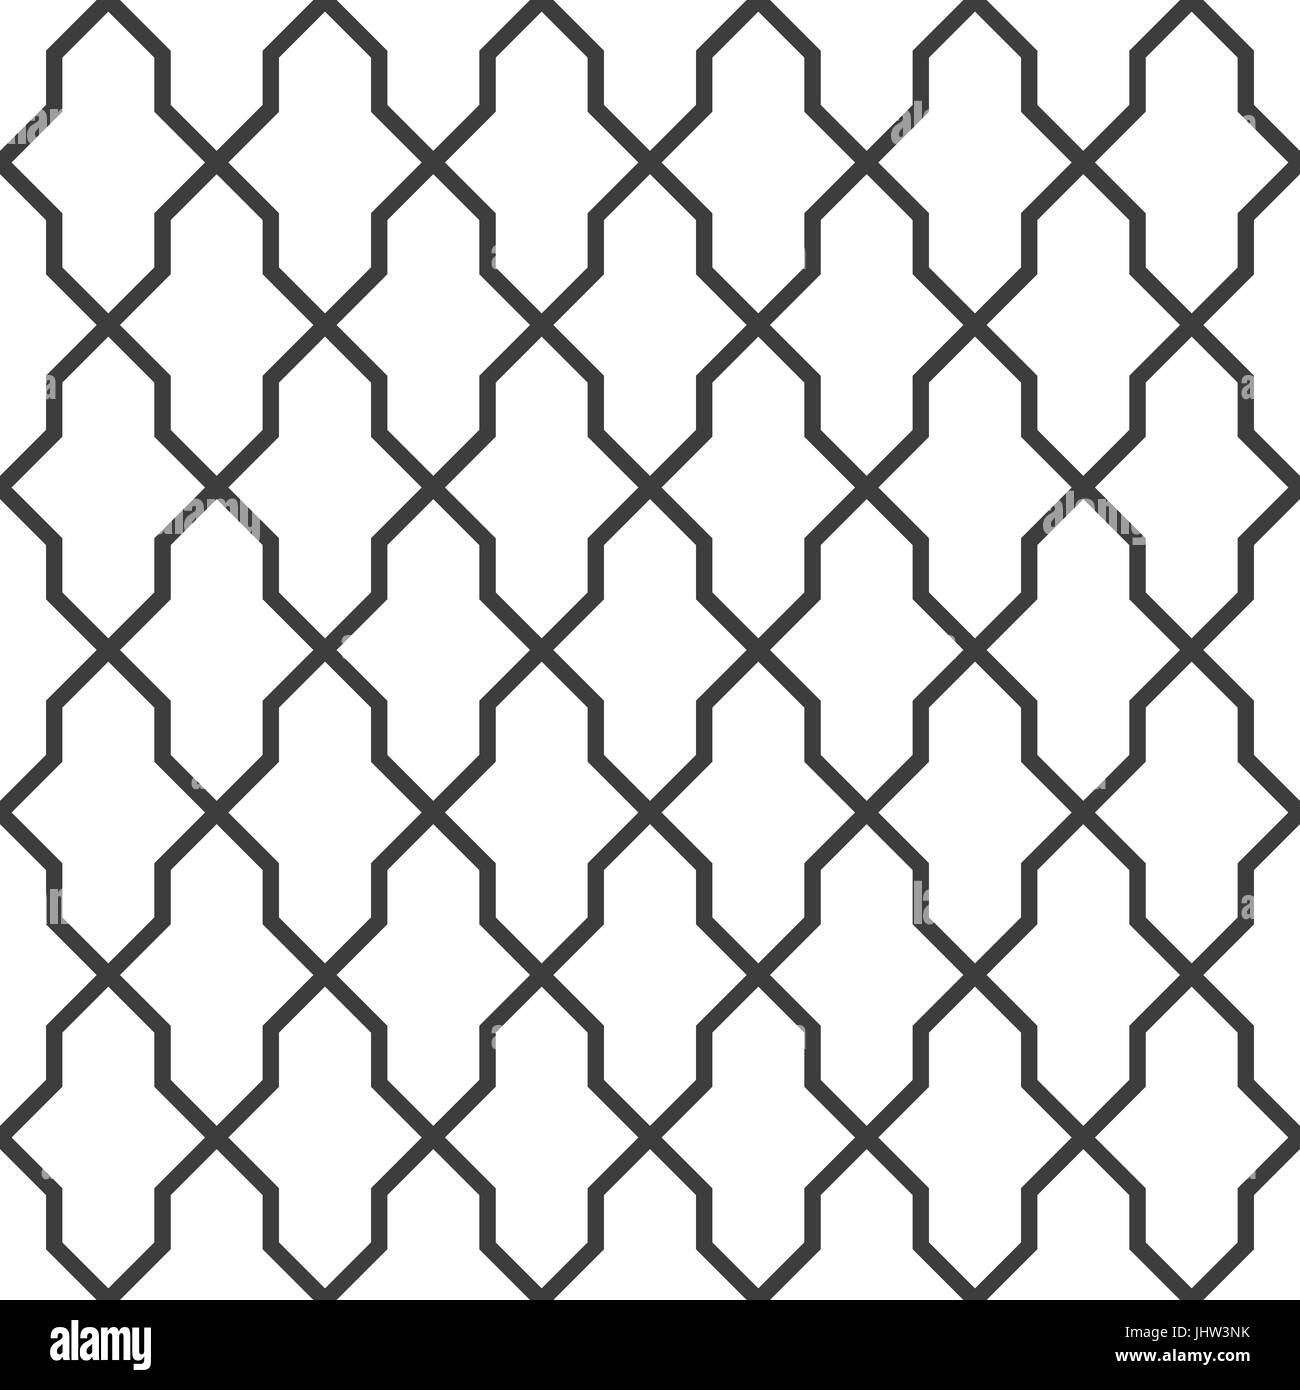 Abstract black and white background. Seamless geometric grille texture, vector illustration. Stock Vector